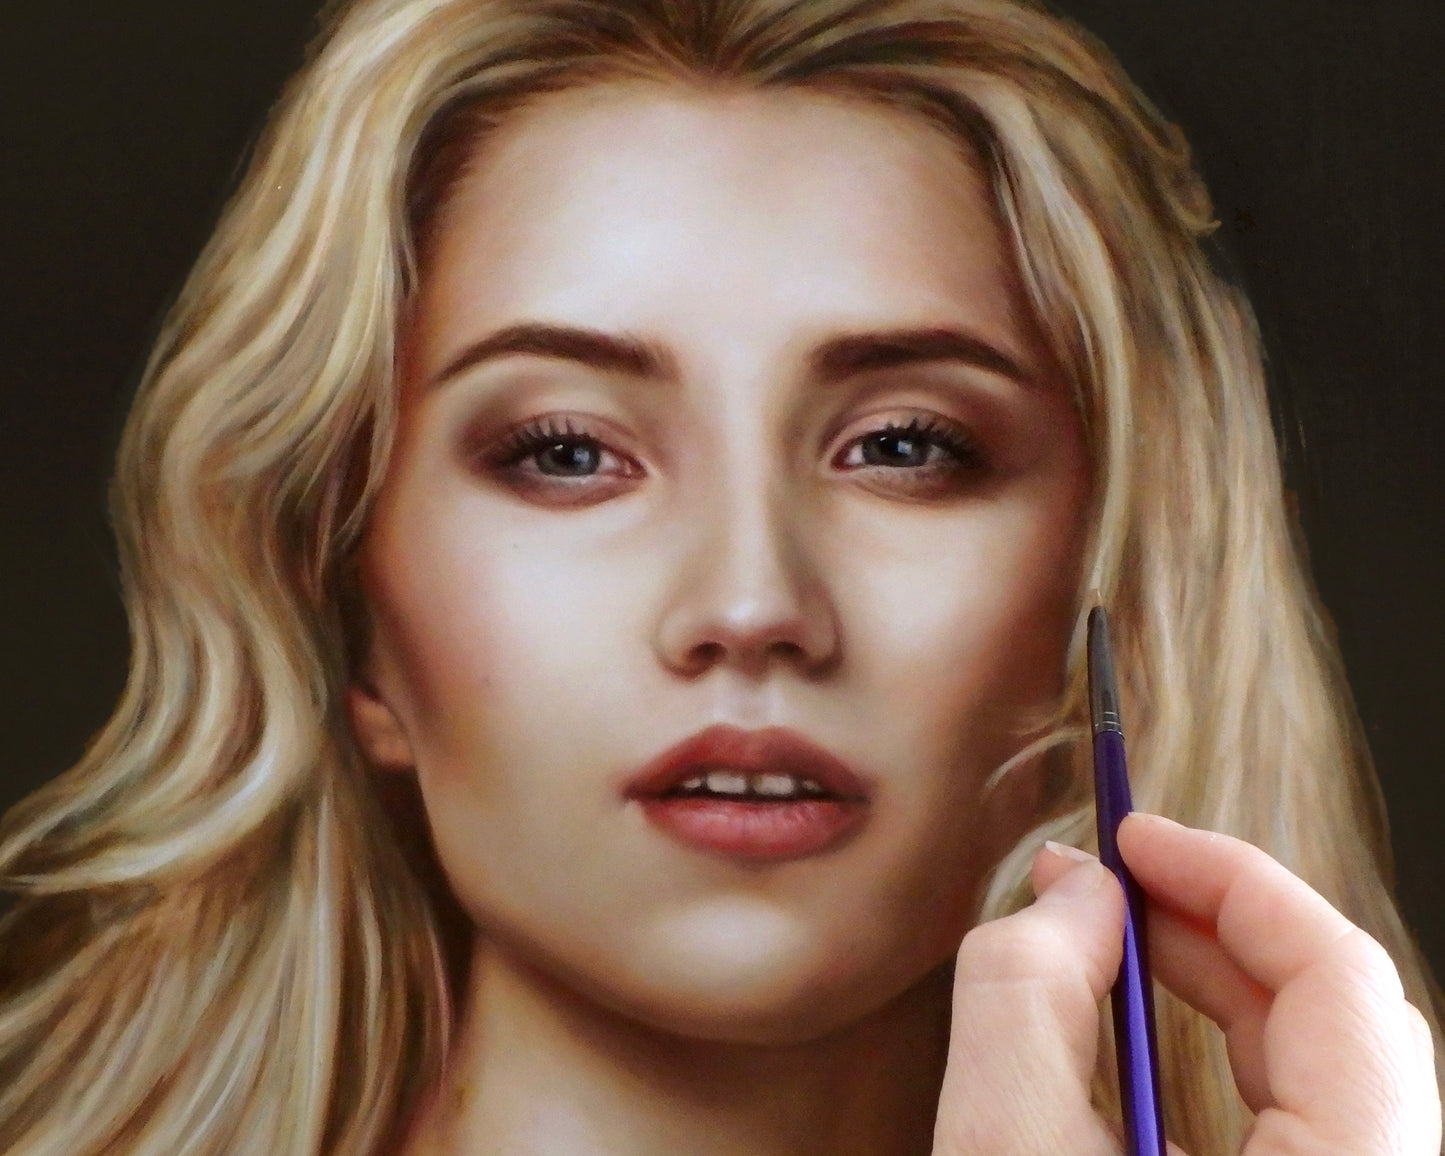 BLONDE • Original Oil Painting (on alupanel) • 22 x 18 in • 2019